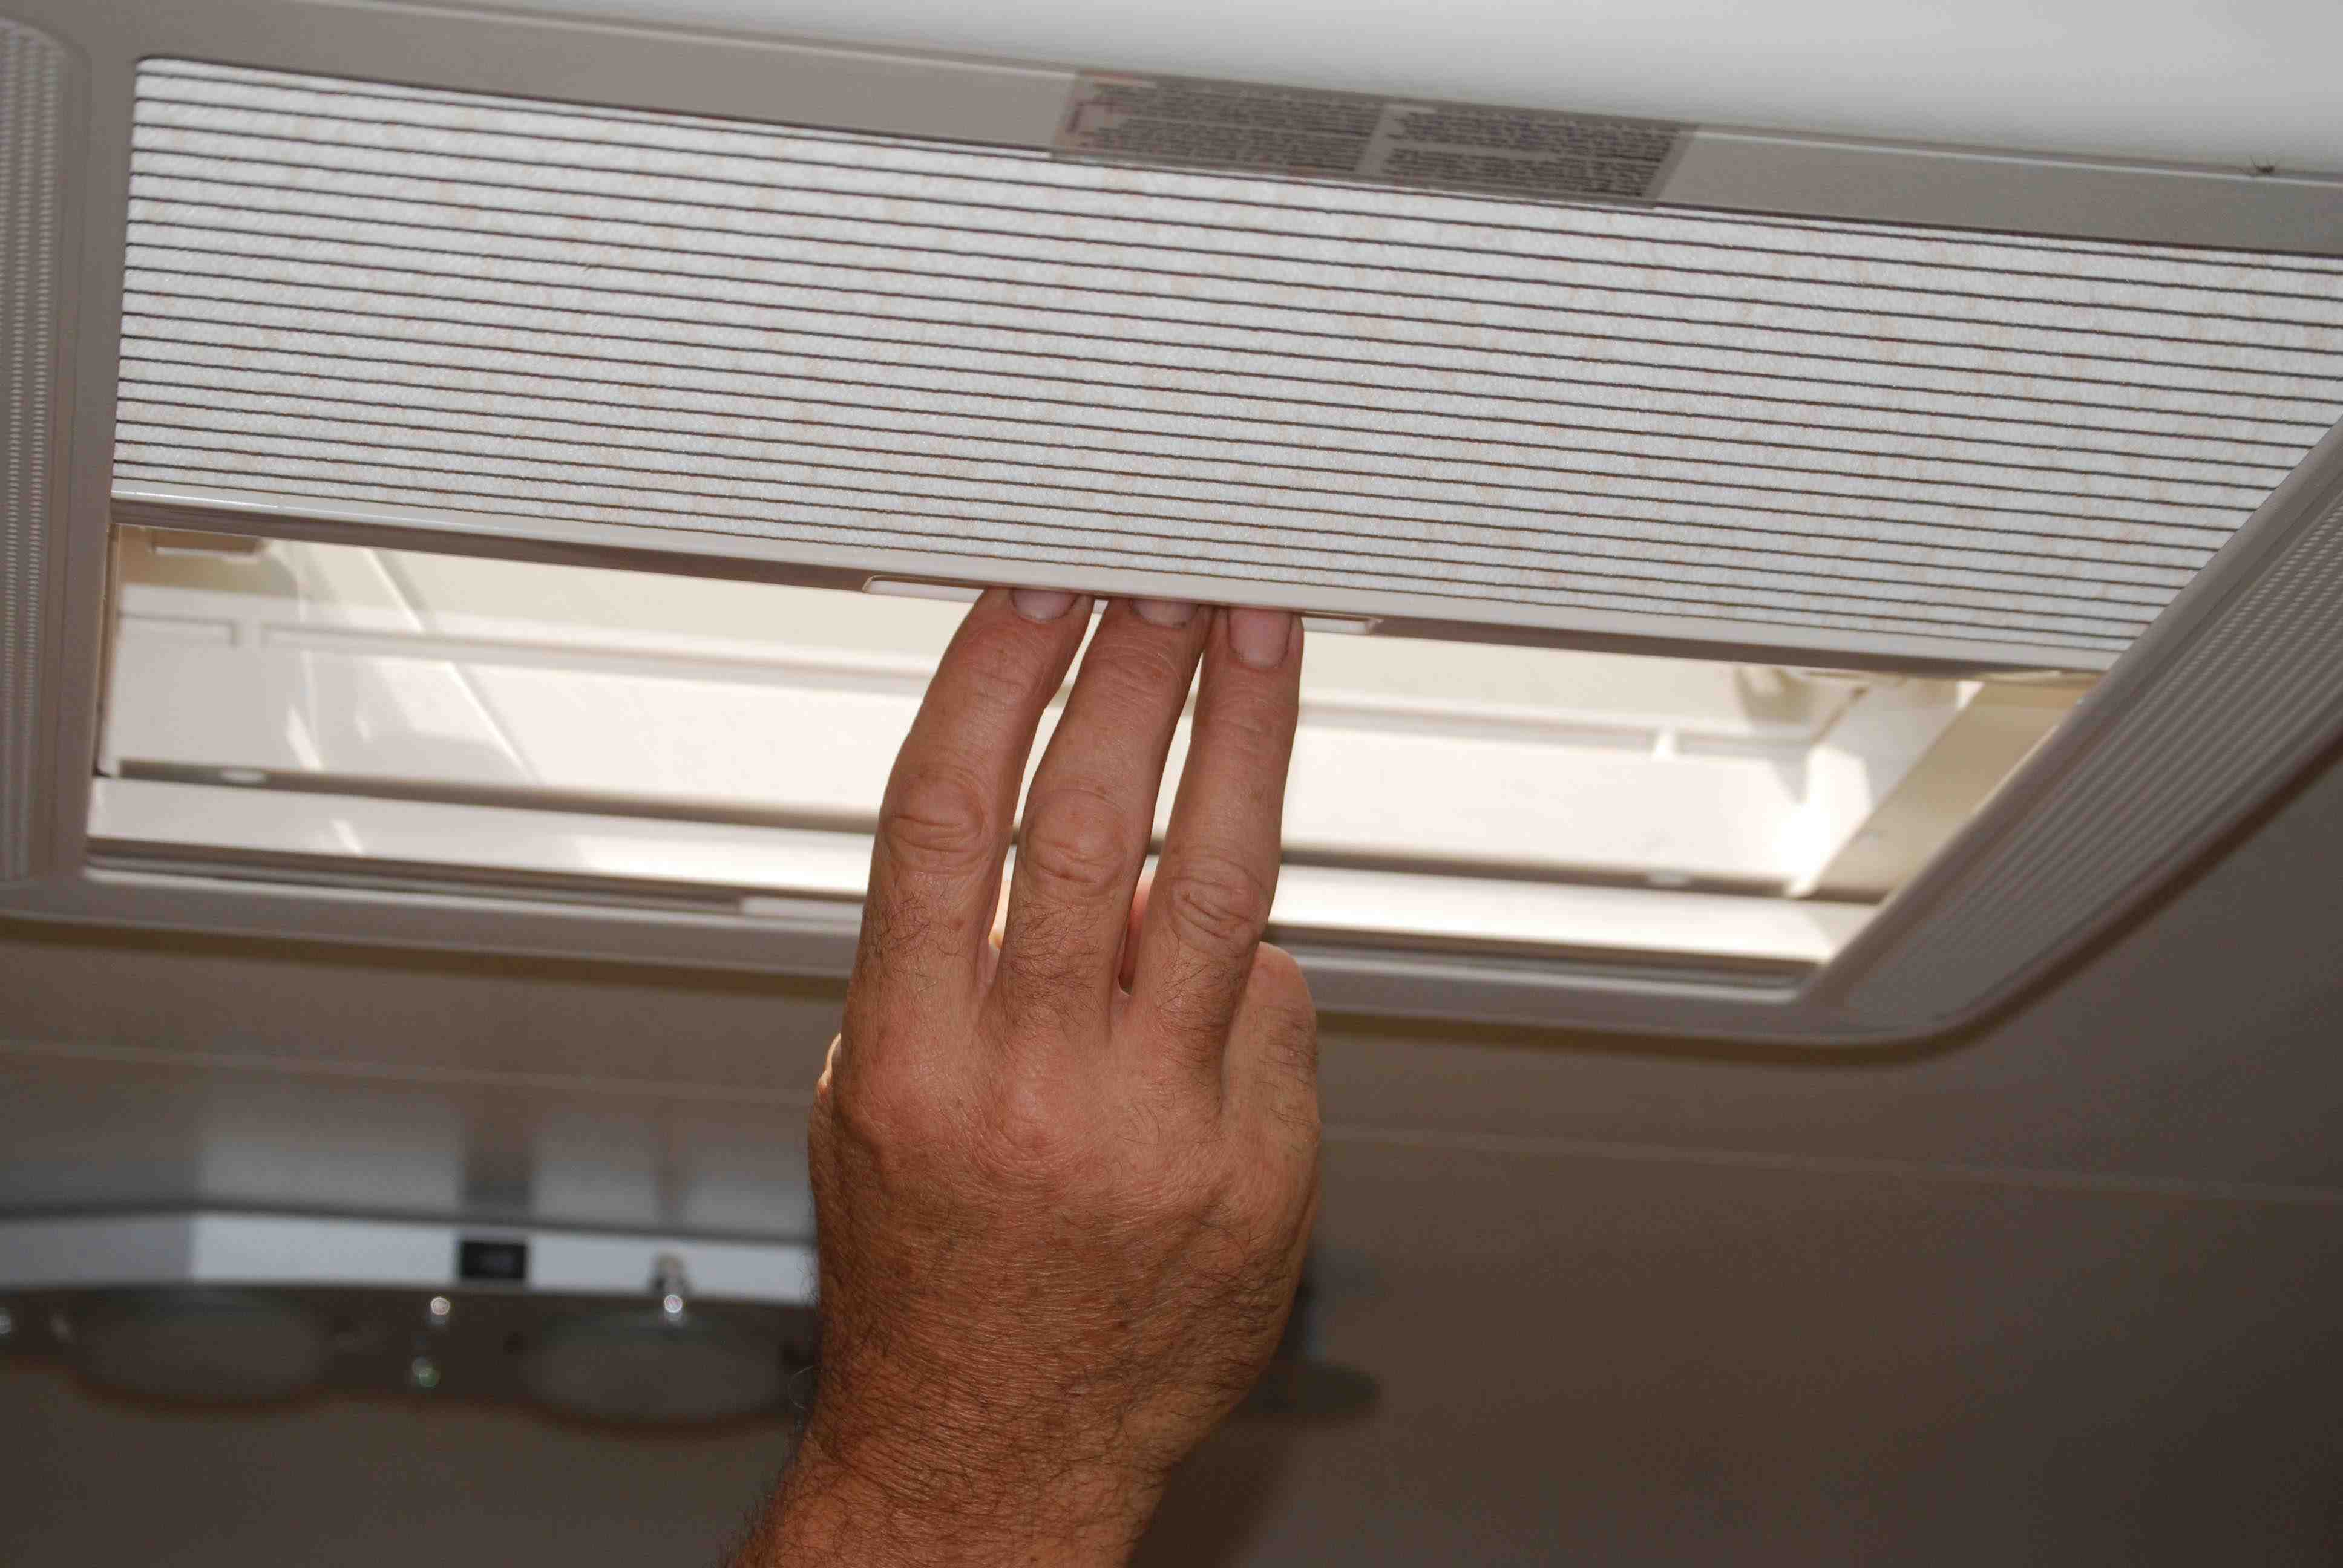 Spring-loaded blinds are best left in the open position